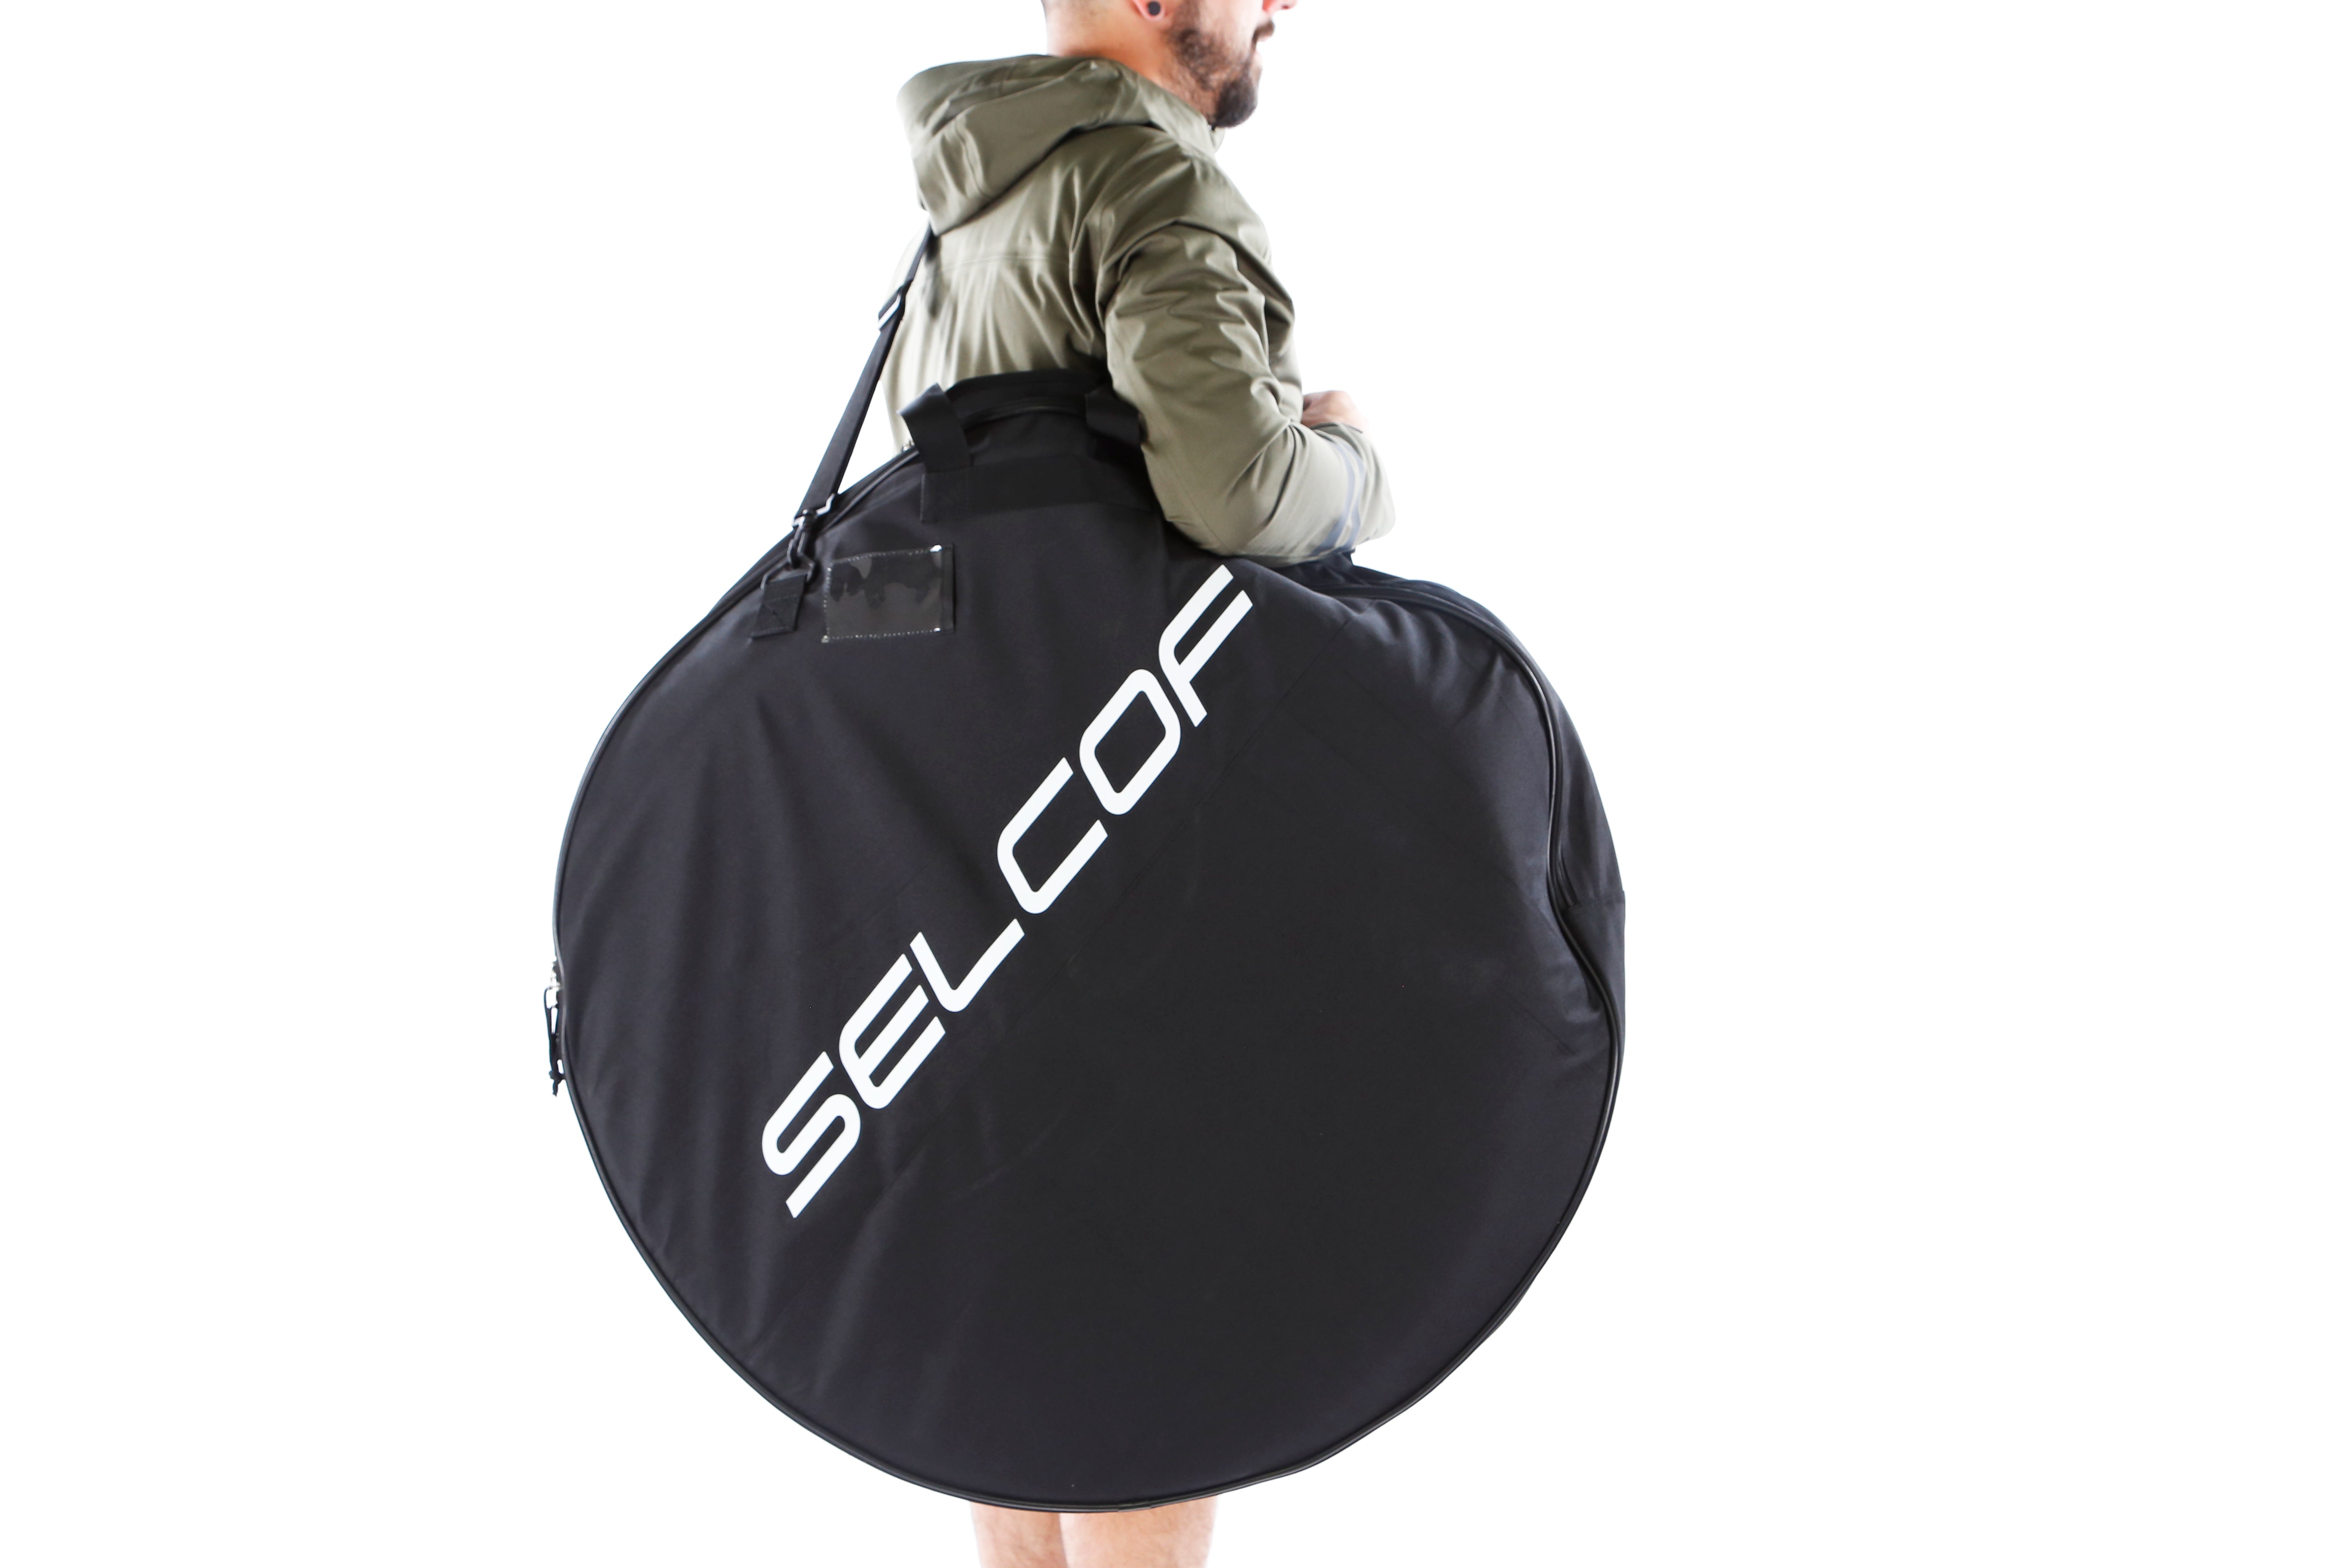 Selcof Padded Double Wheel and Tyre Bag